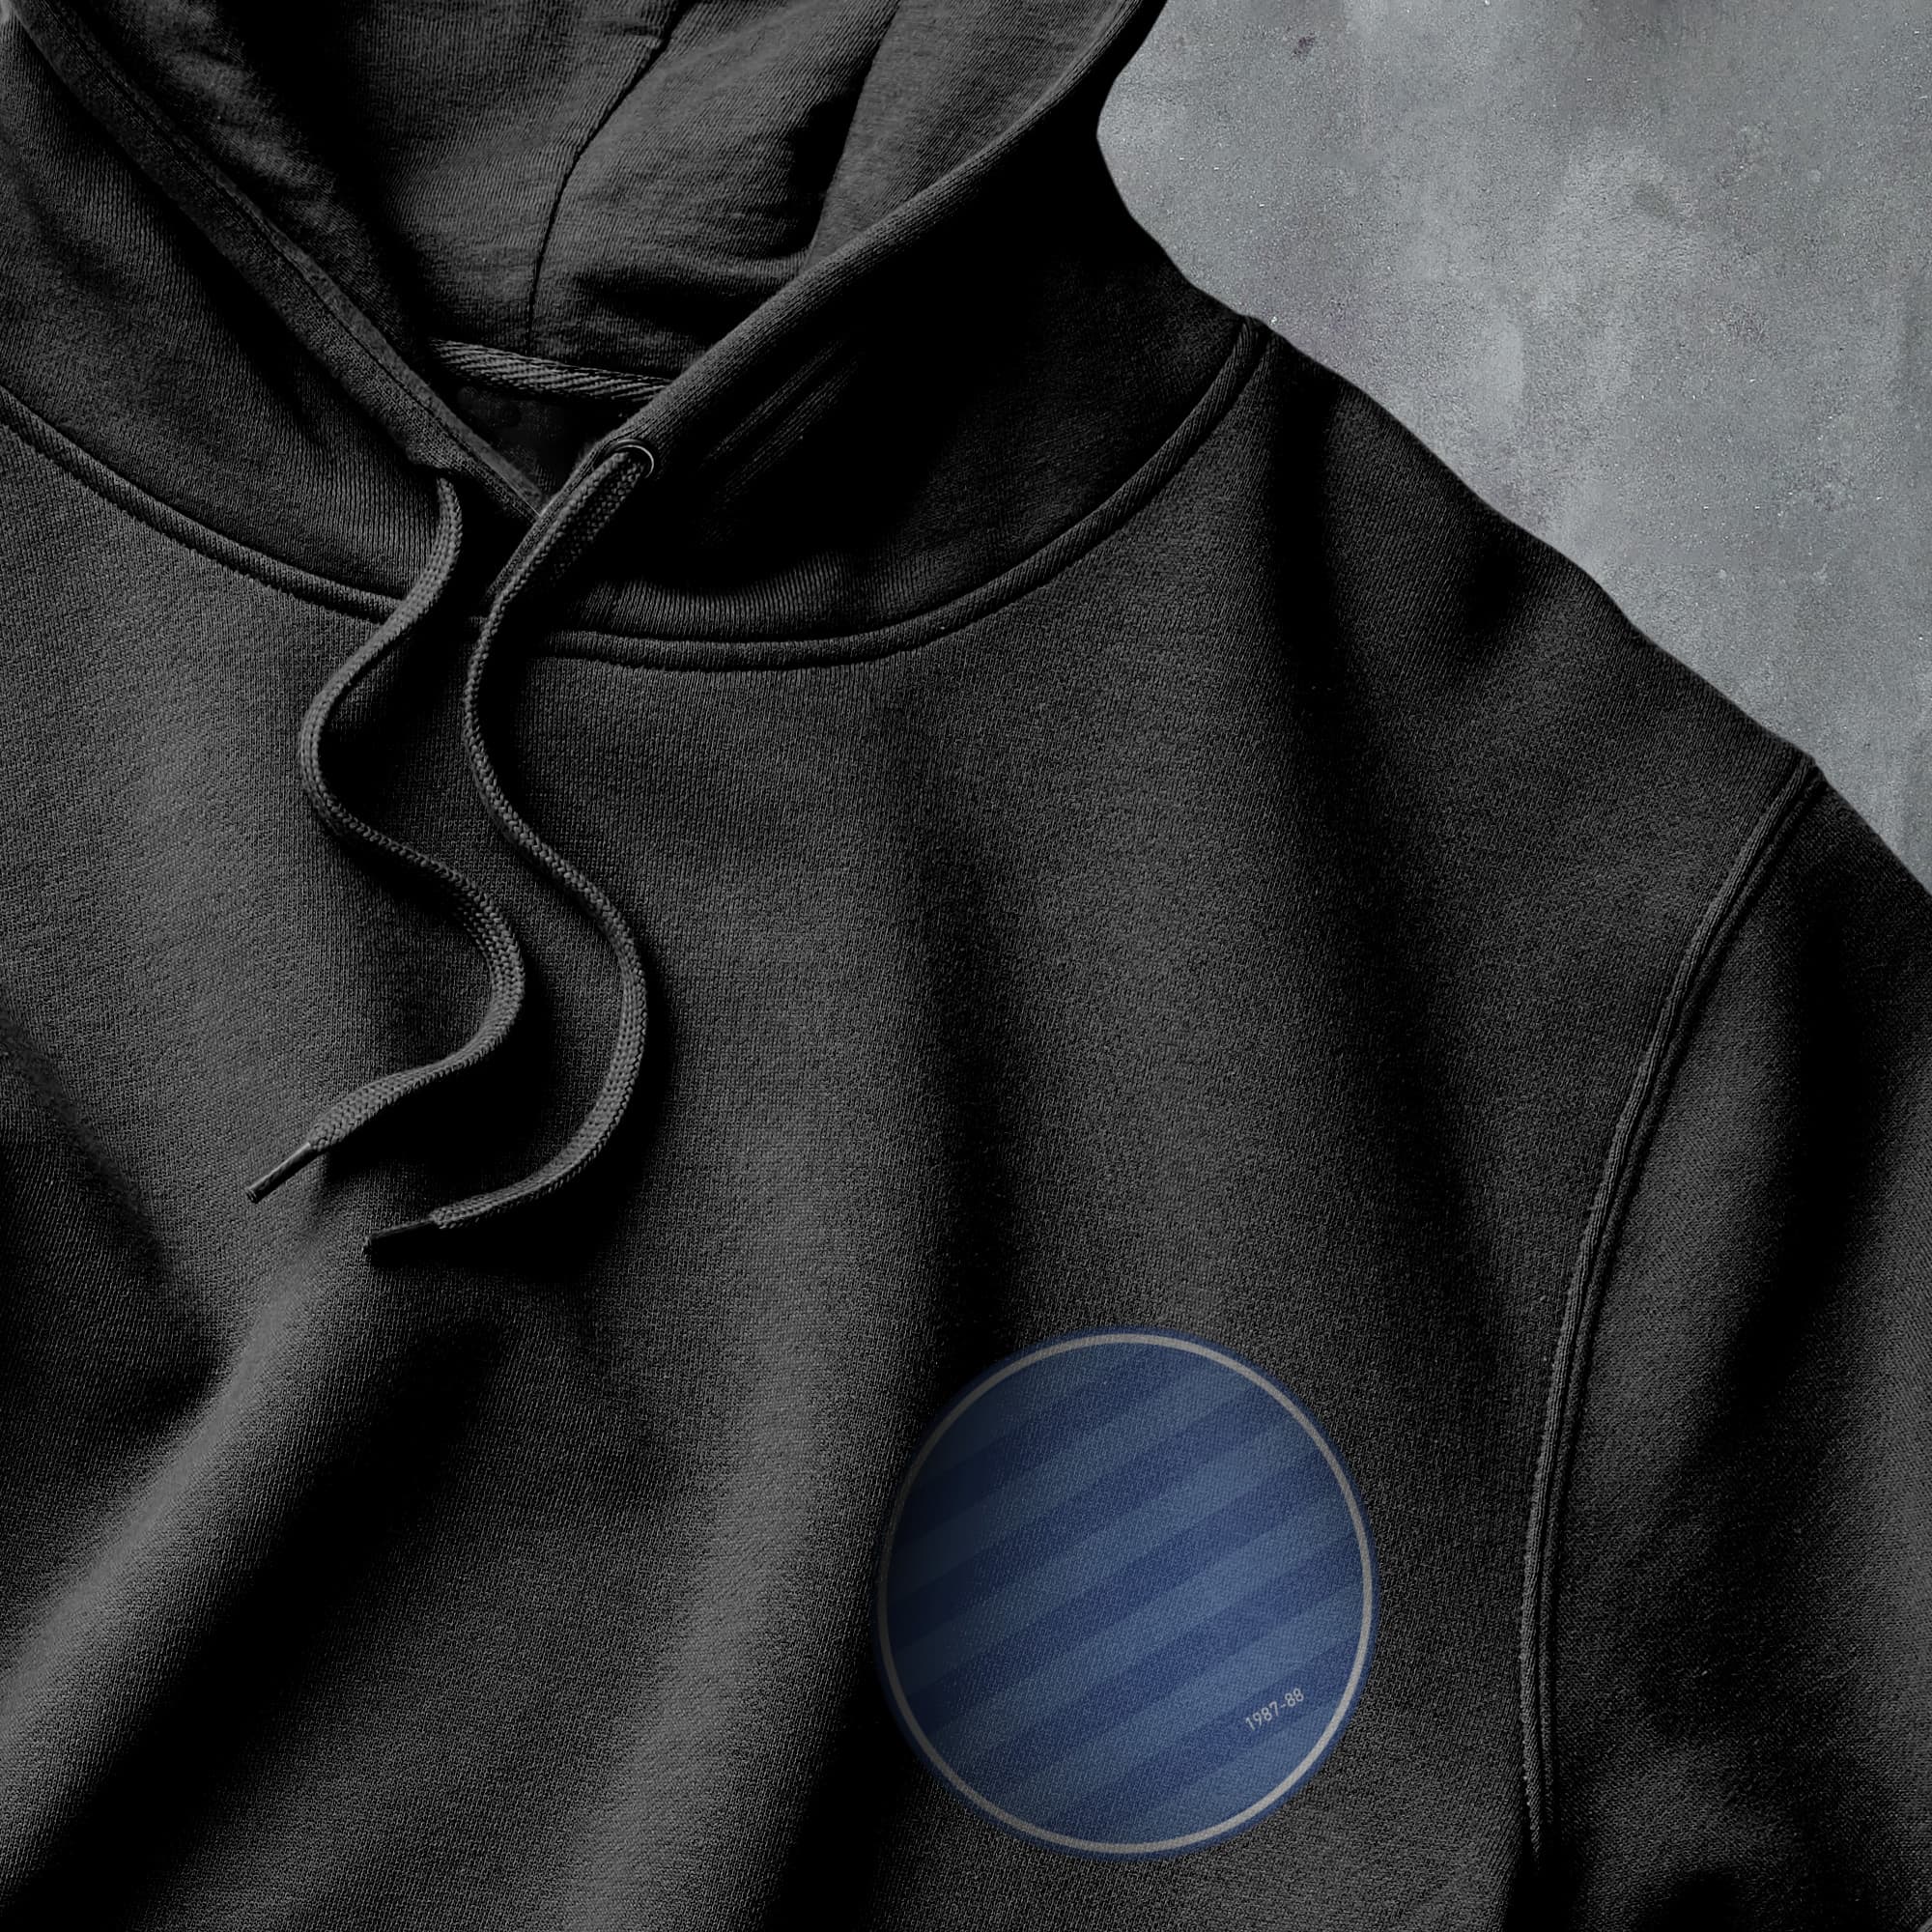 a black hoodie with a blue circle on it